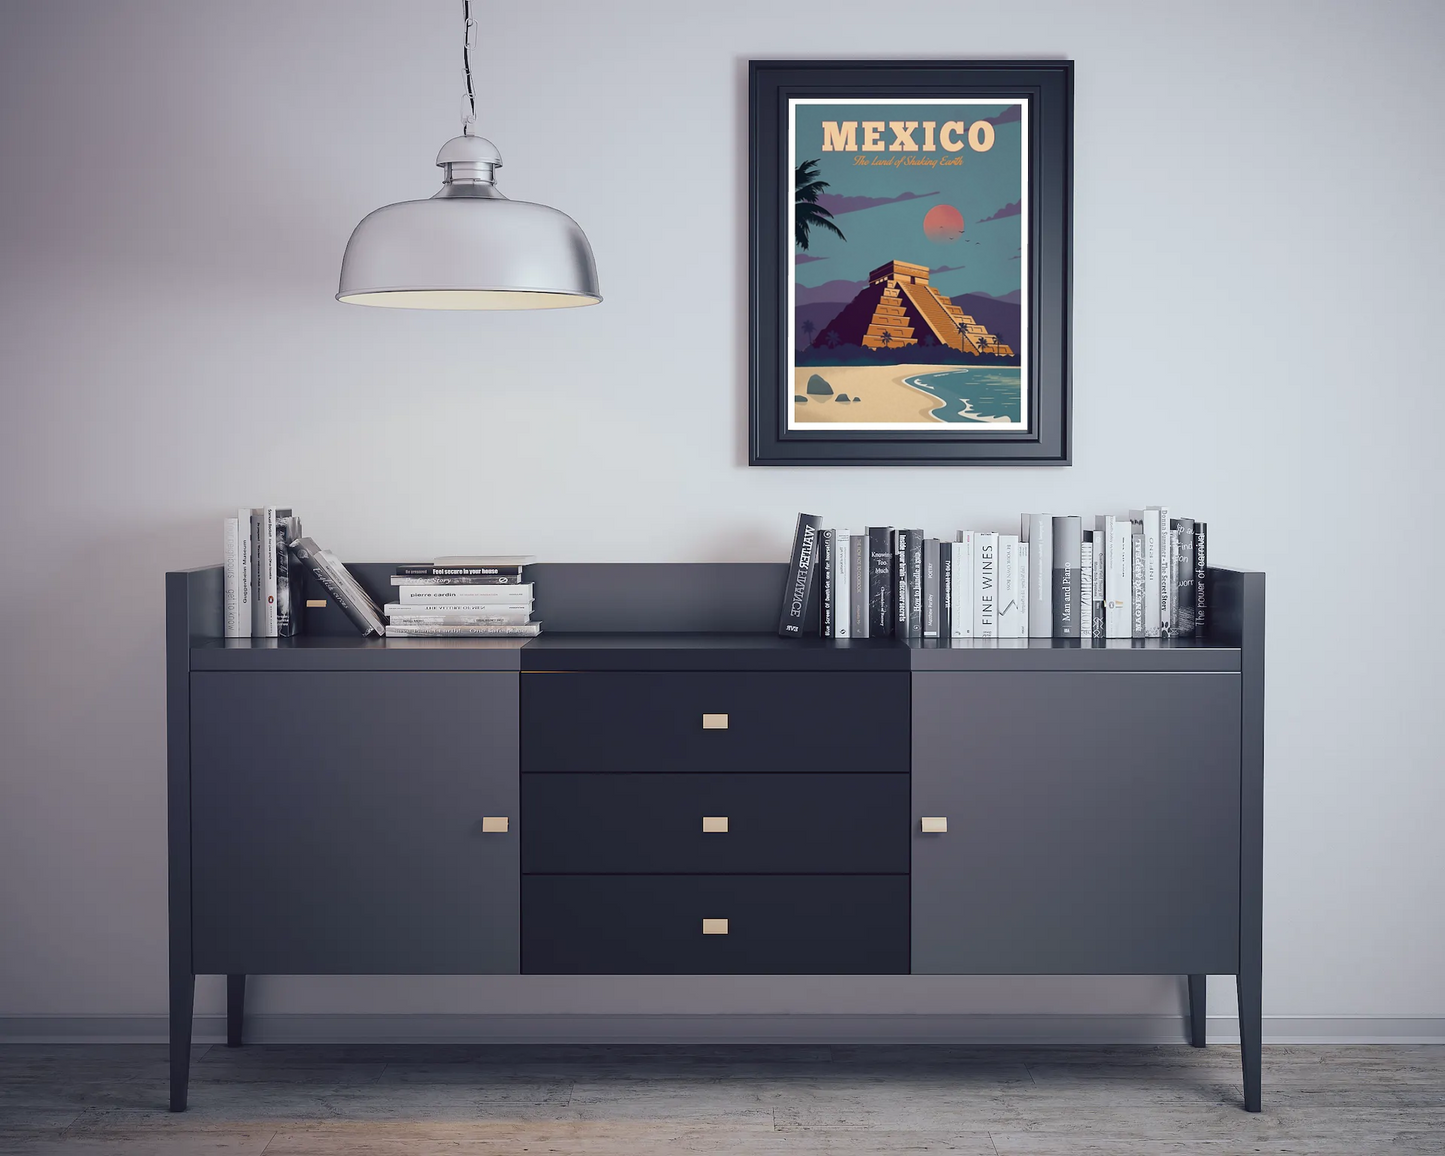 Vintage Mexico Temple Travel Art Painting